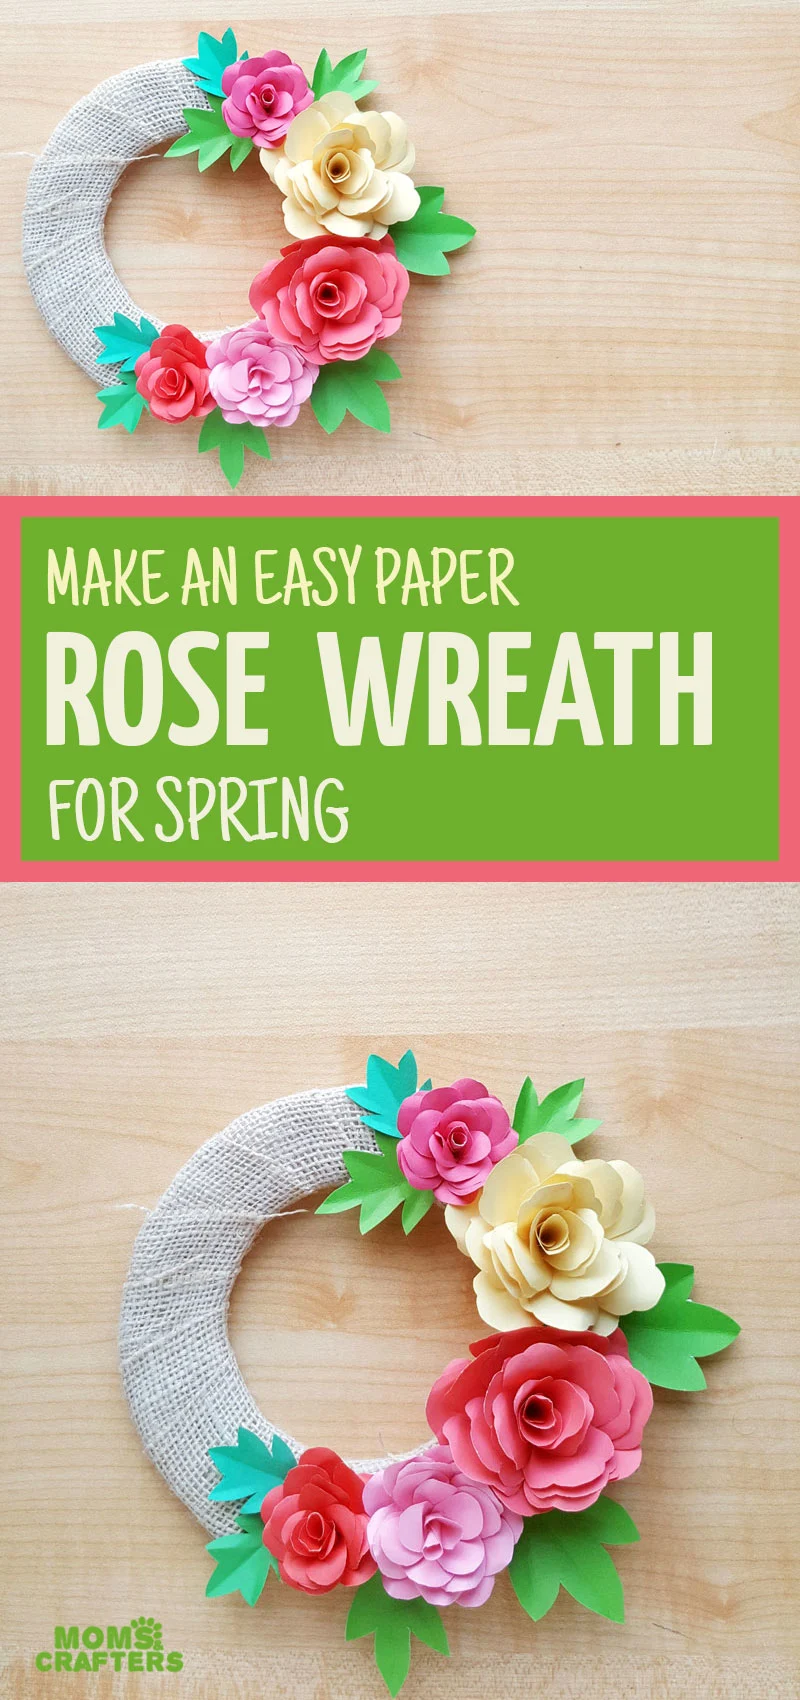 Make your own paper flower wreaths using a free printable template! These DIY paper roses are so pretty and colorful and fun for Spring!